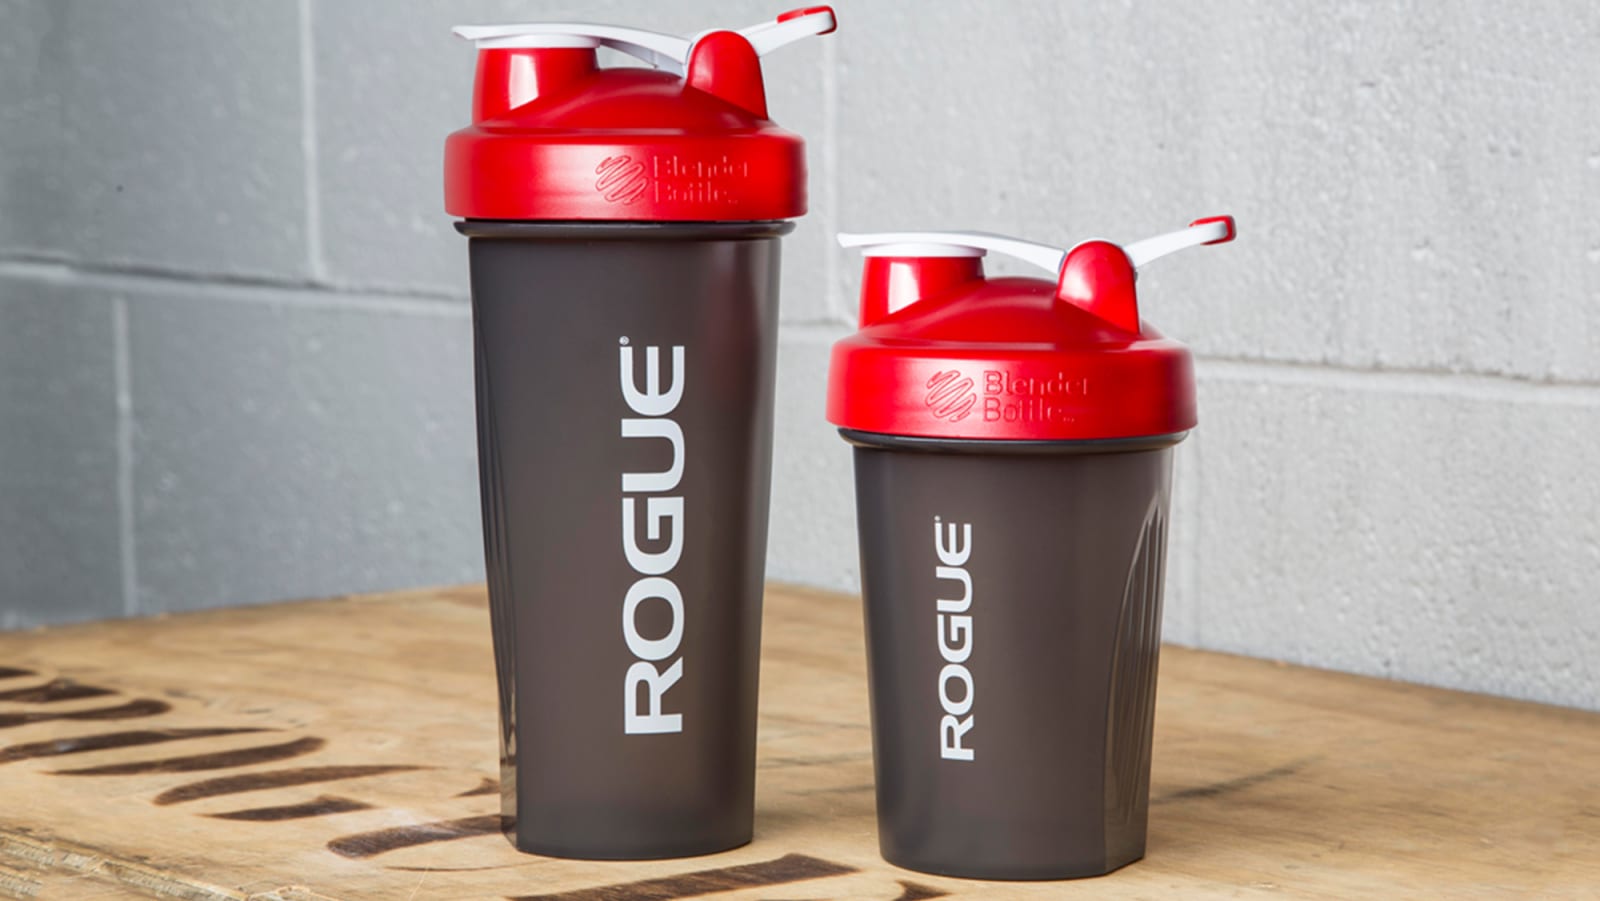 Bottle　Canada　Protein　Shakes　Rogue　Fitness　Black　Blender